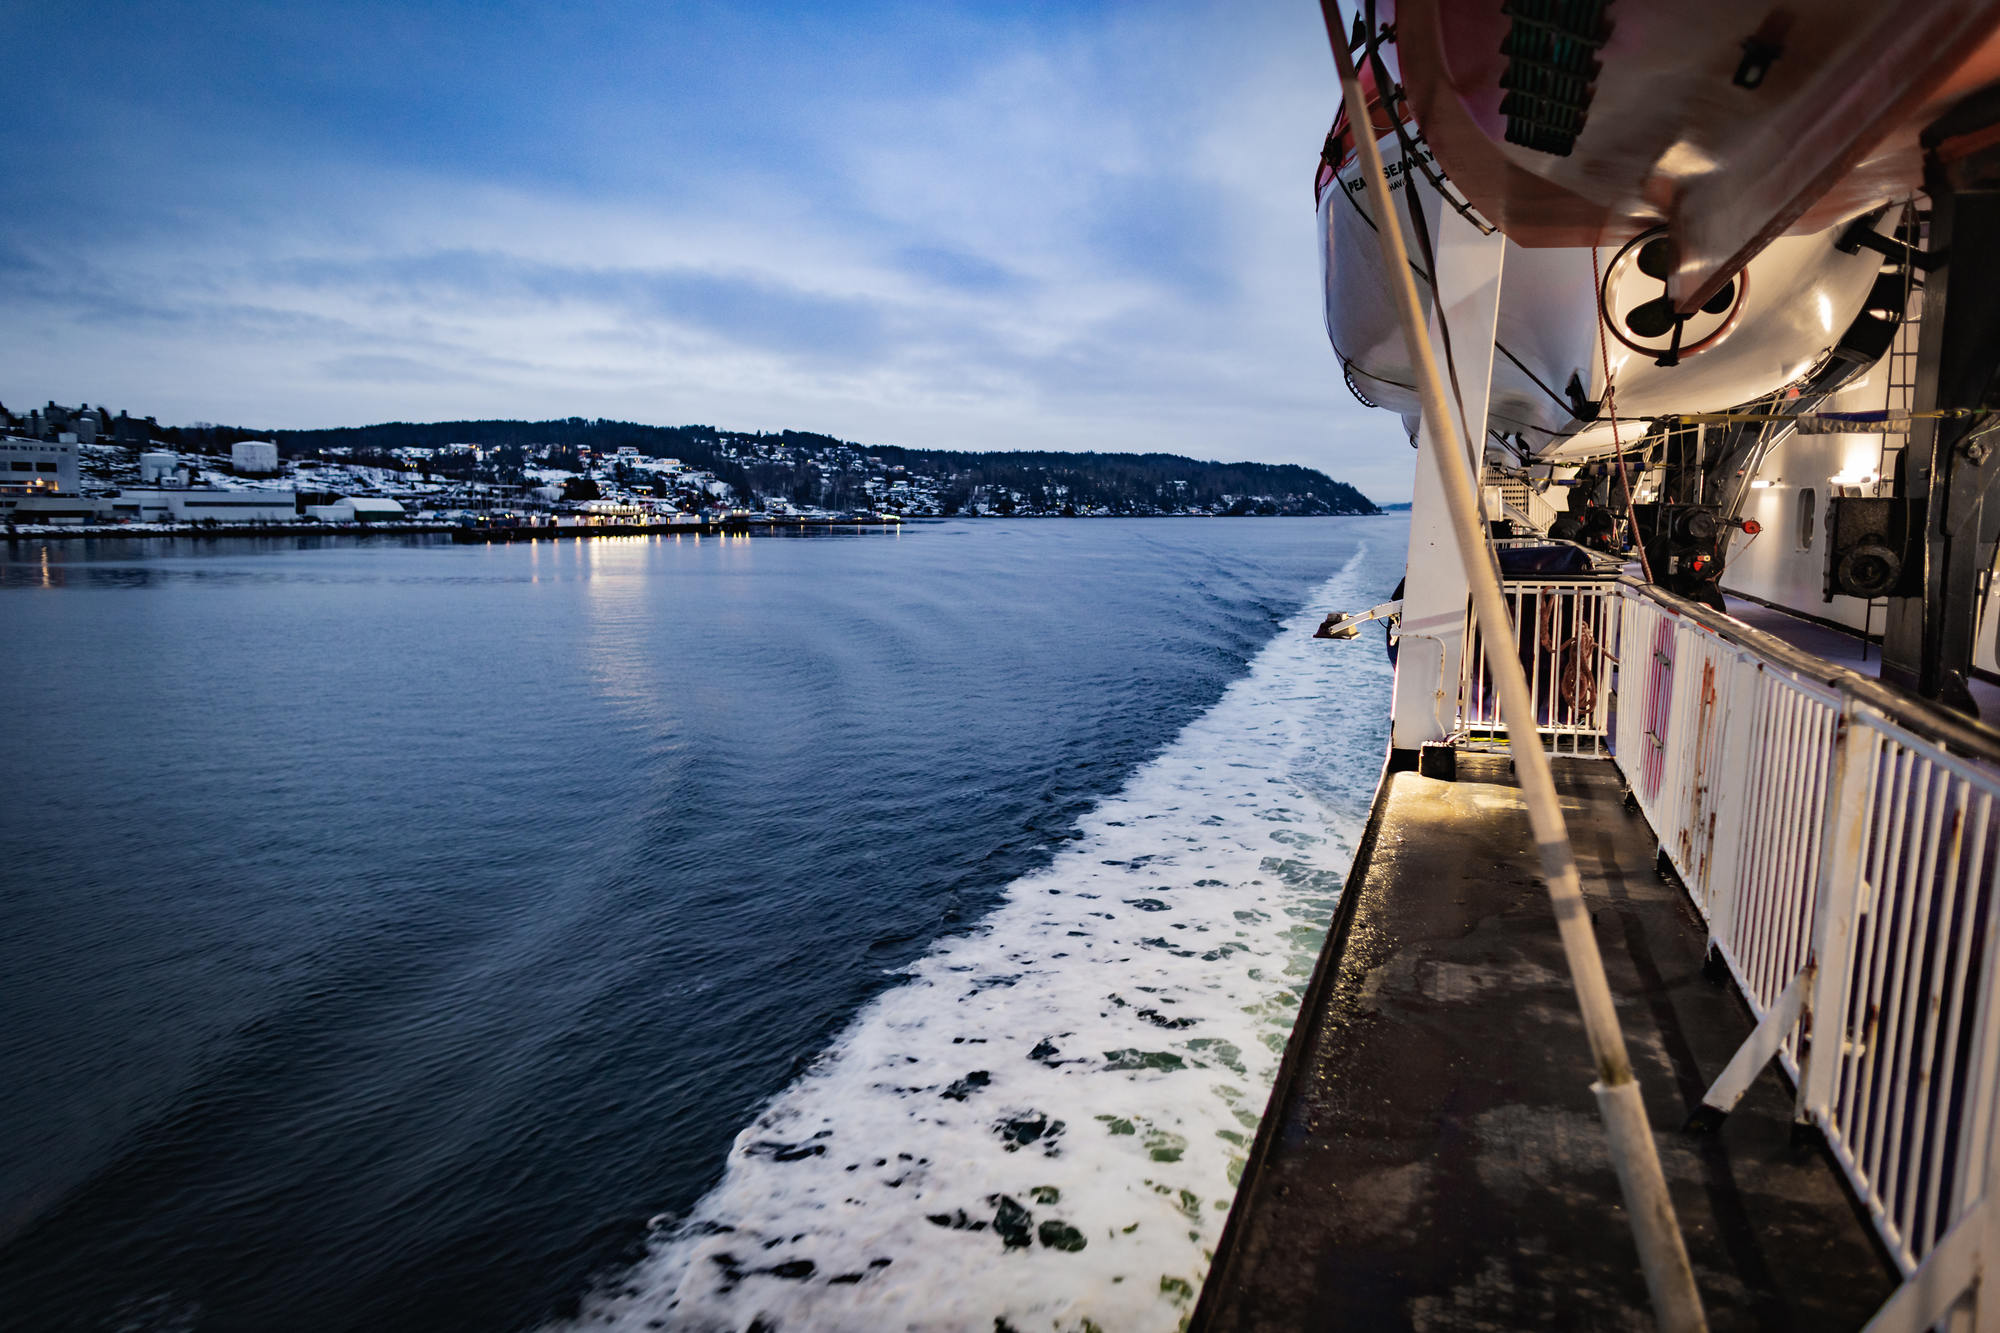 dfds-minicruise-oslo-christmas-time-travel-photography-09